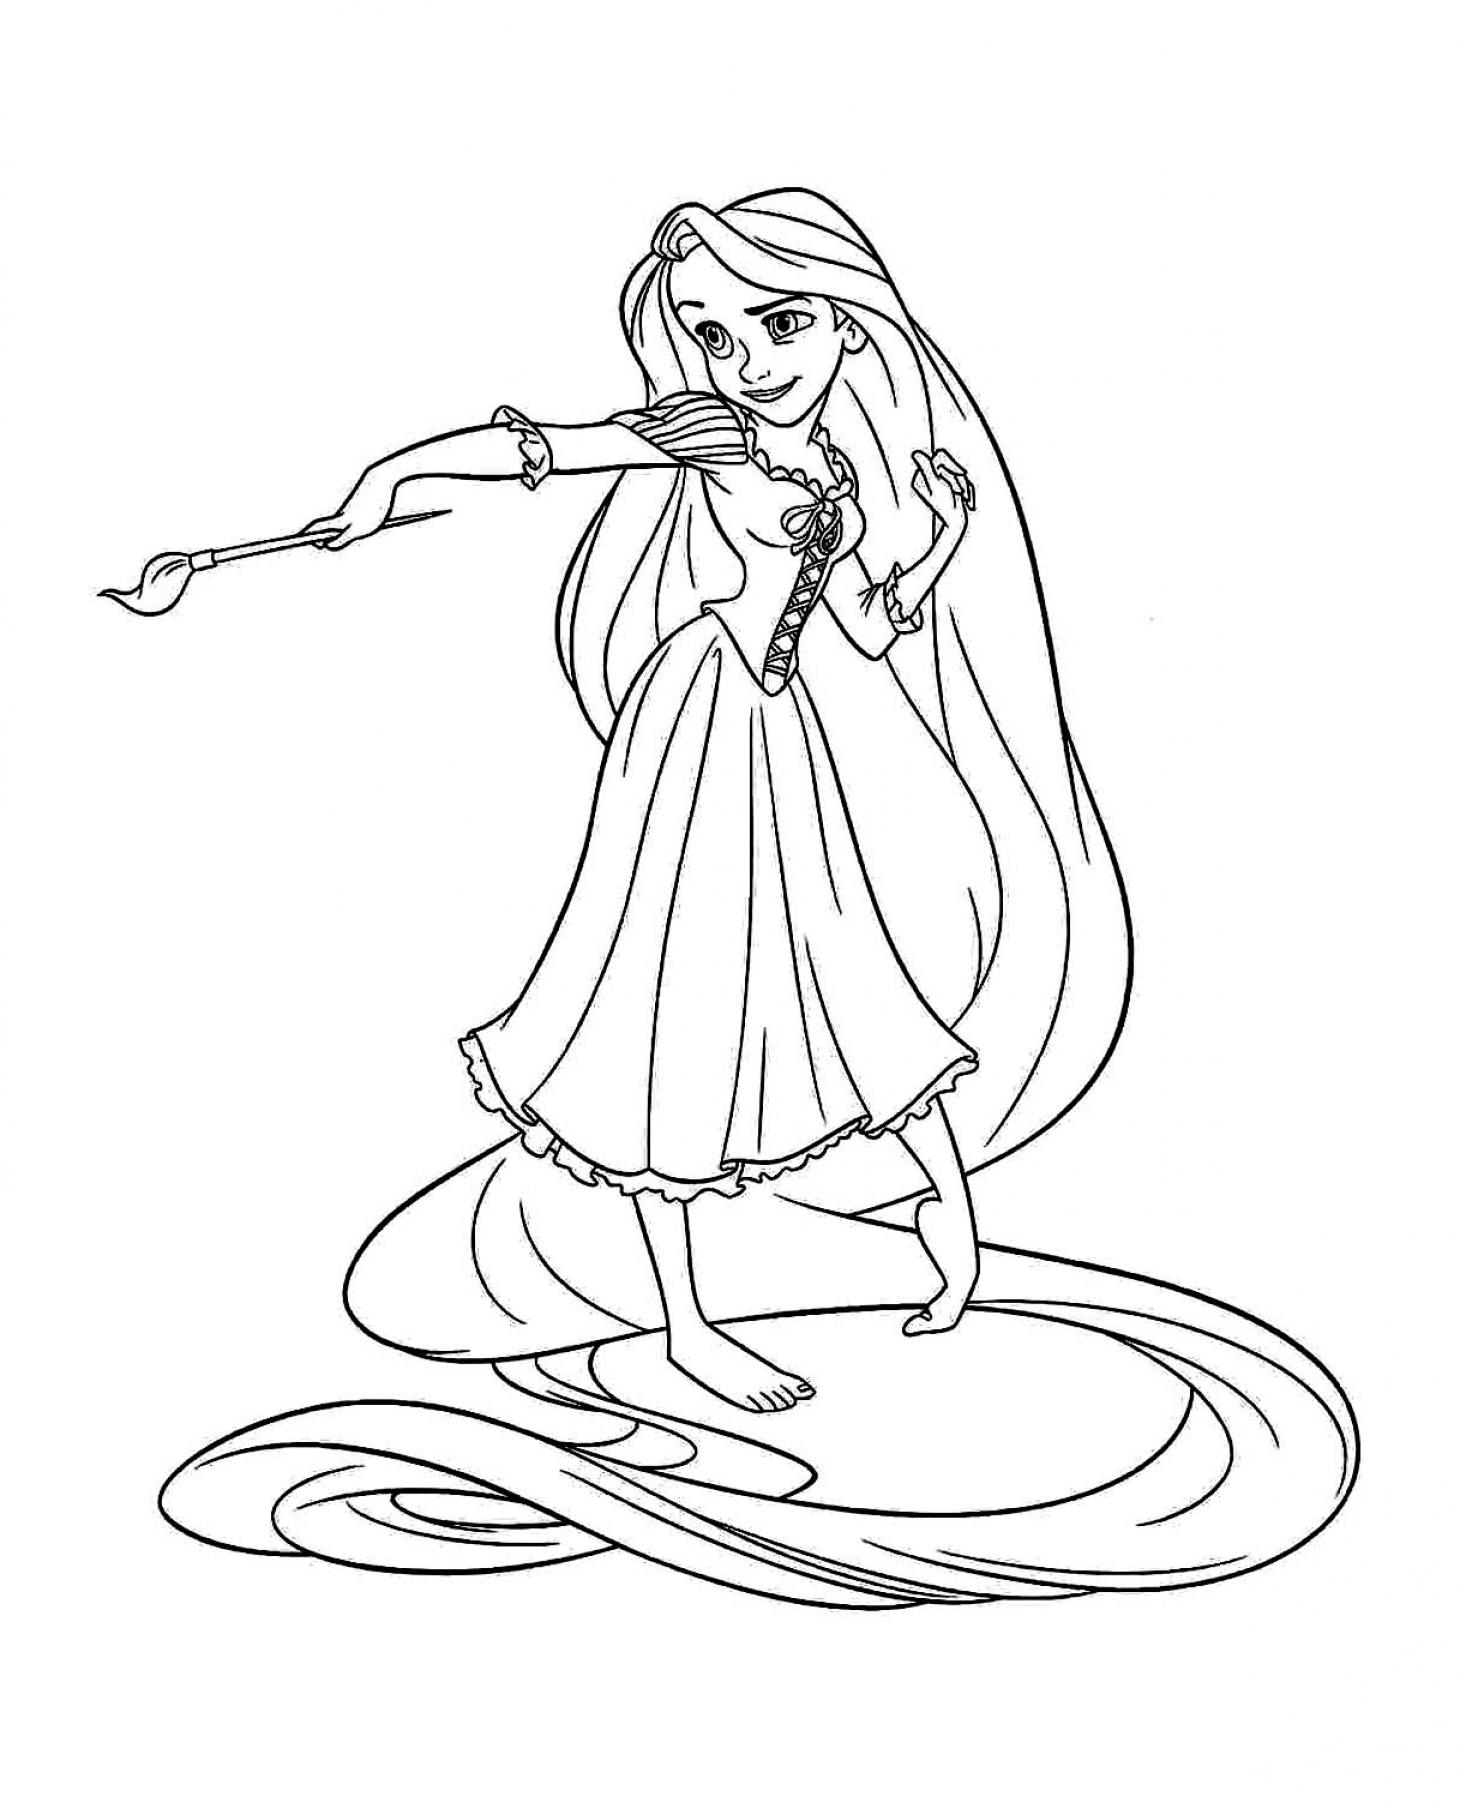 Tangled Kids Coloring Pages - SheetalColor.com